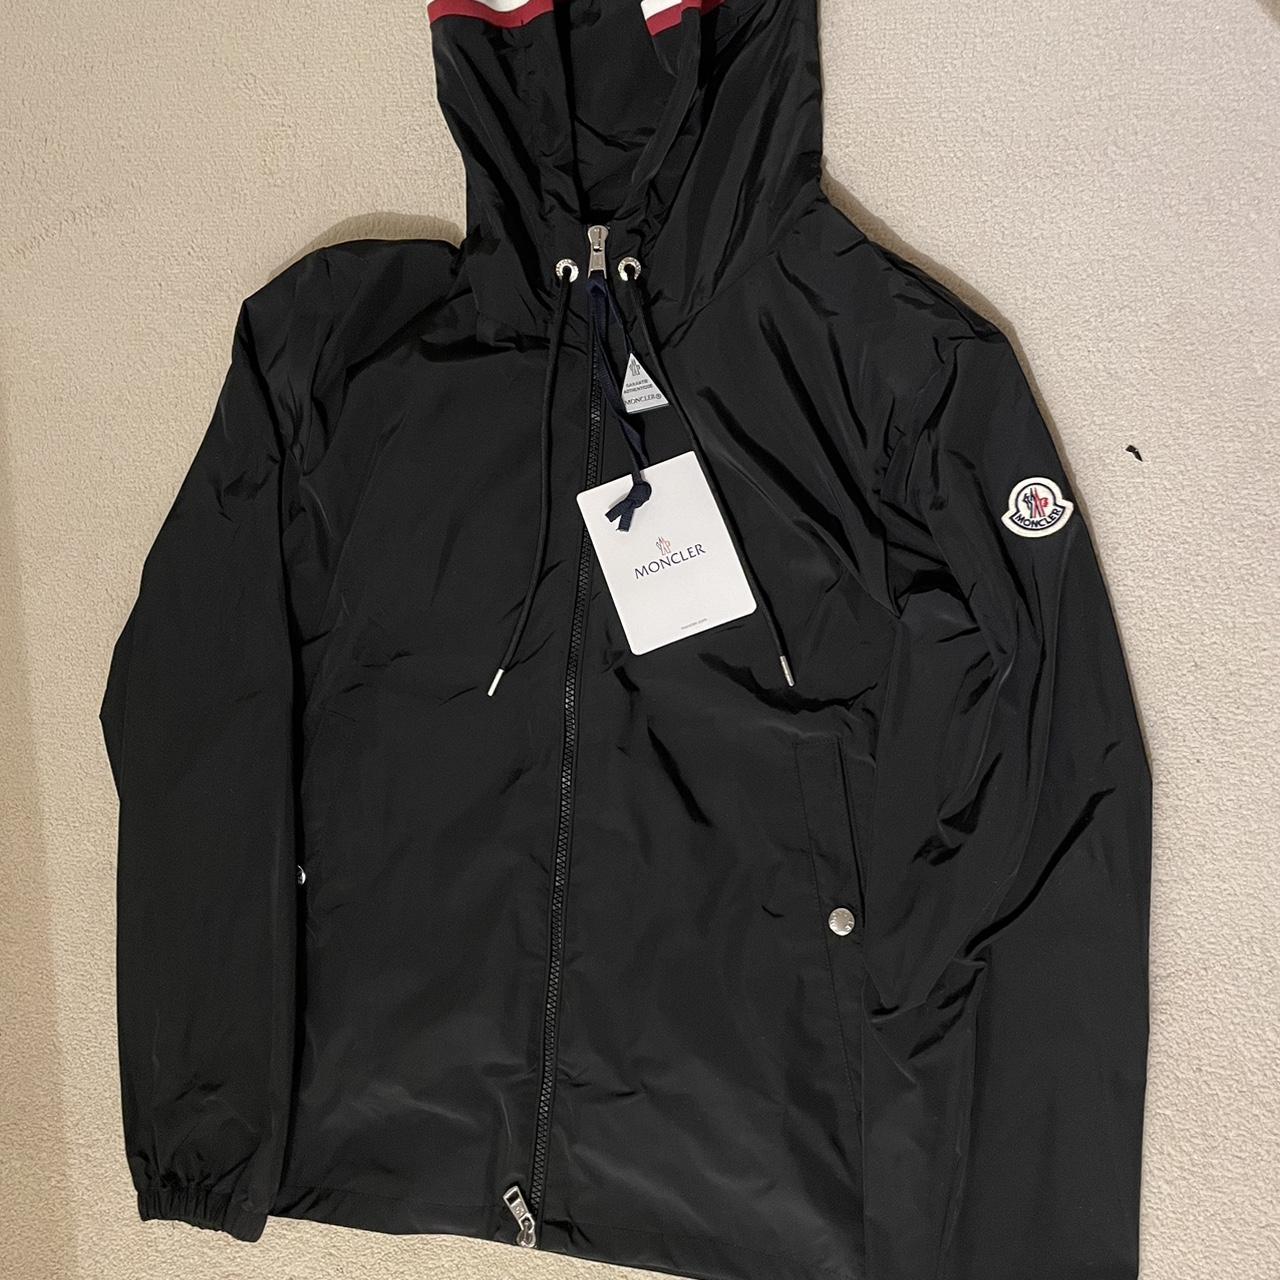 Moncler windbreaker 💨 Brand new never worn with tags... - Depop